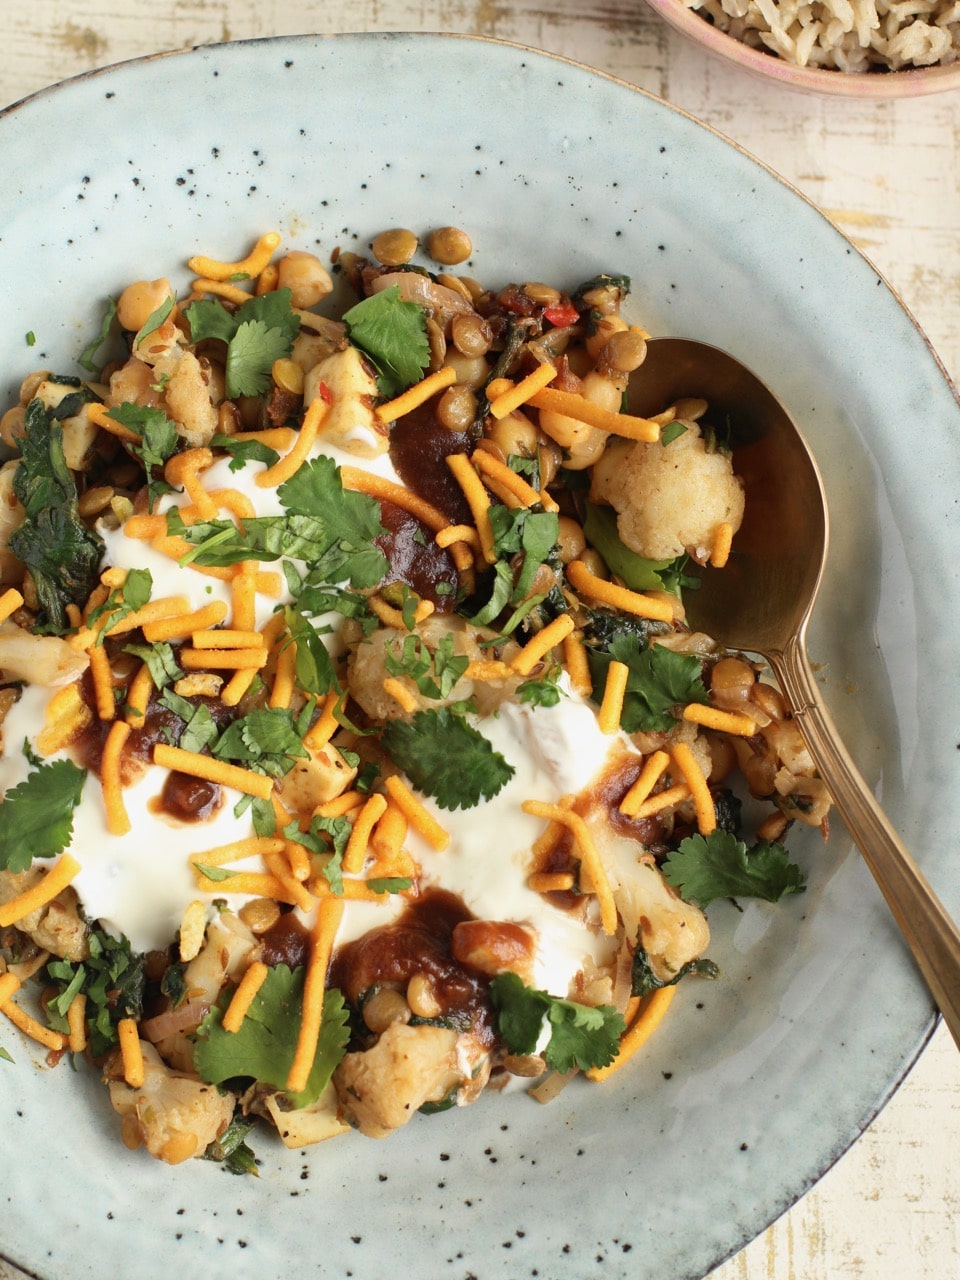 Chickpea spinach and paneer chaat bowl | Natural Kitchen Adventures 